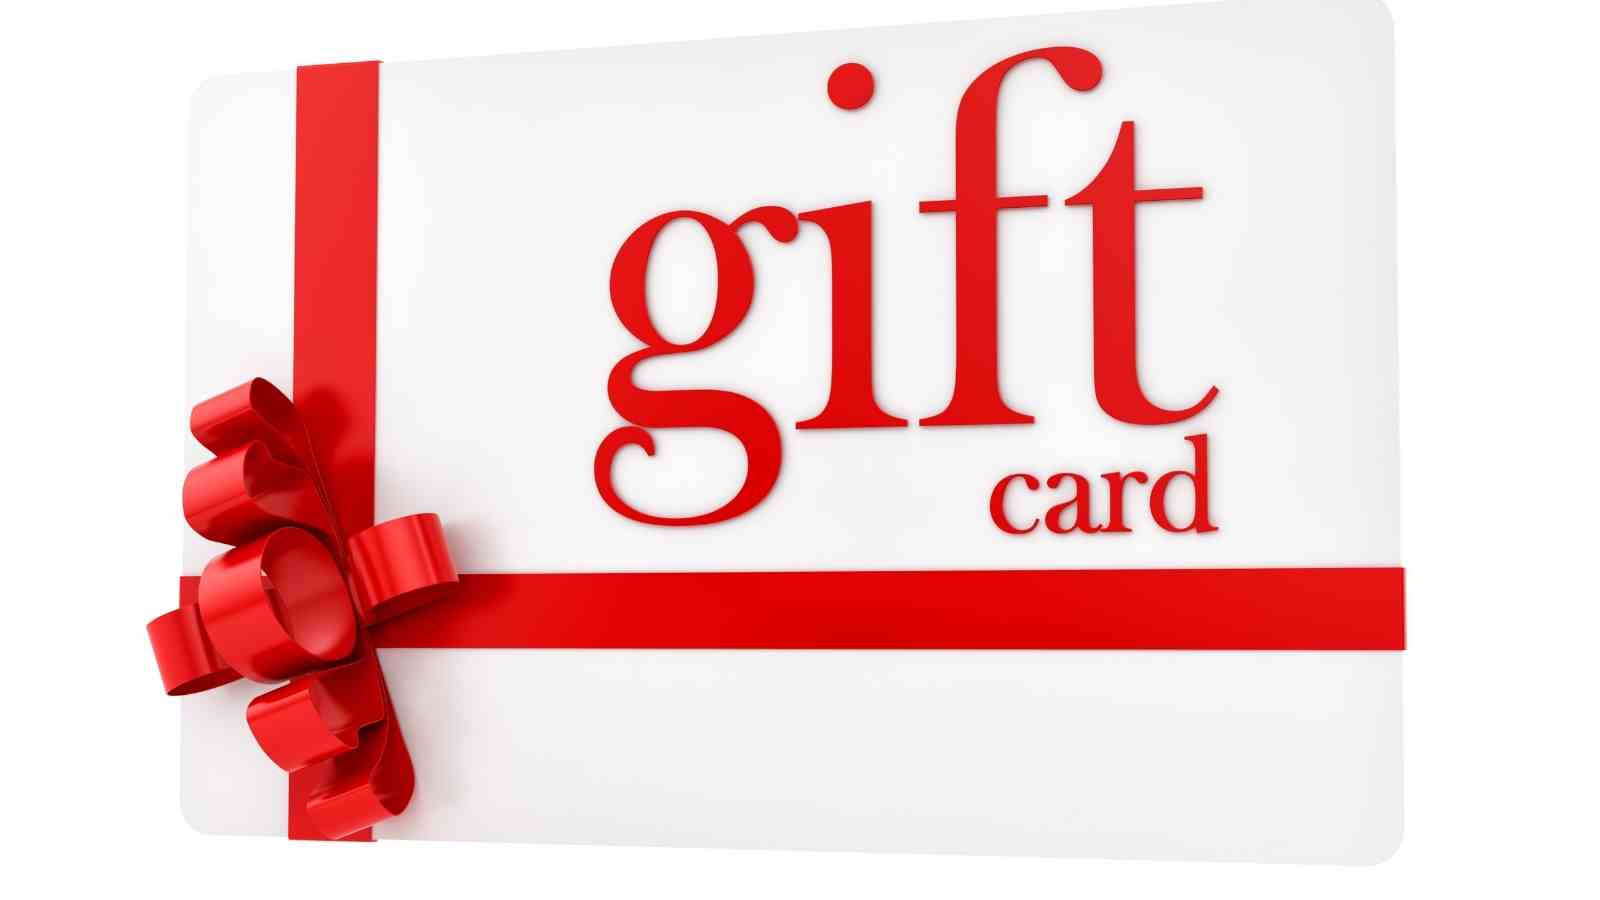 Universal Gift Cards